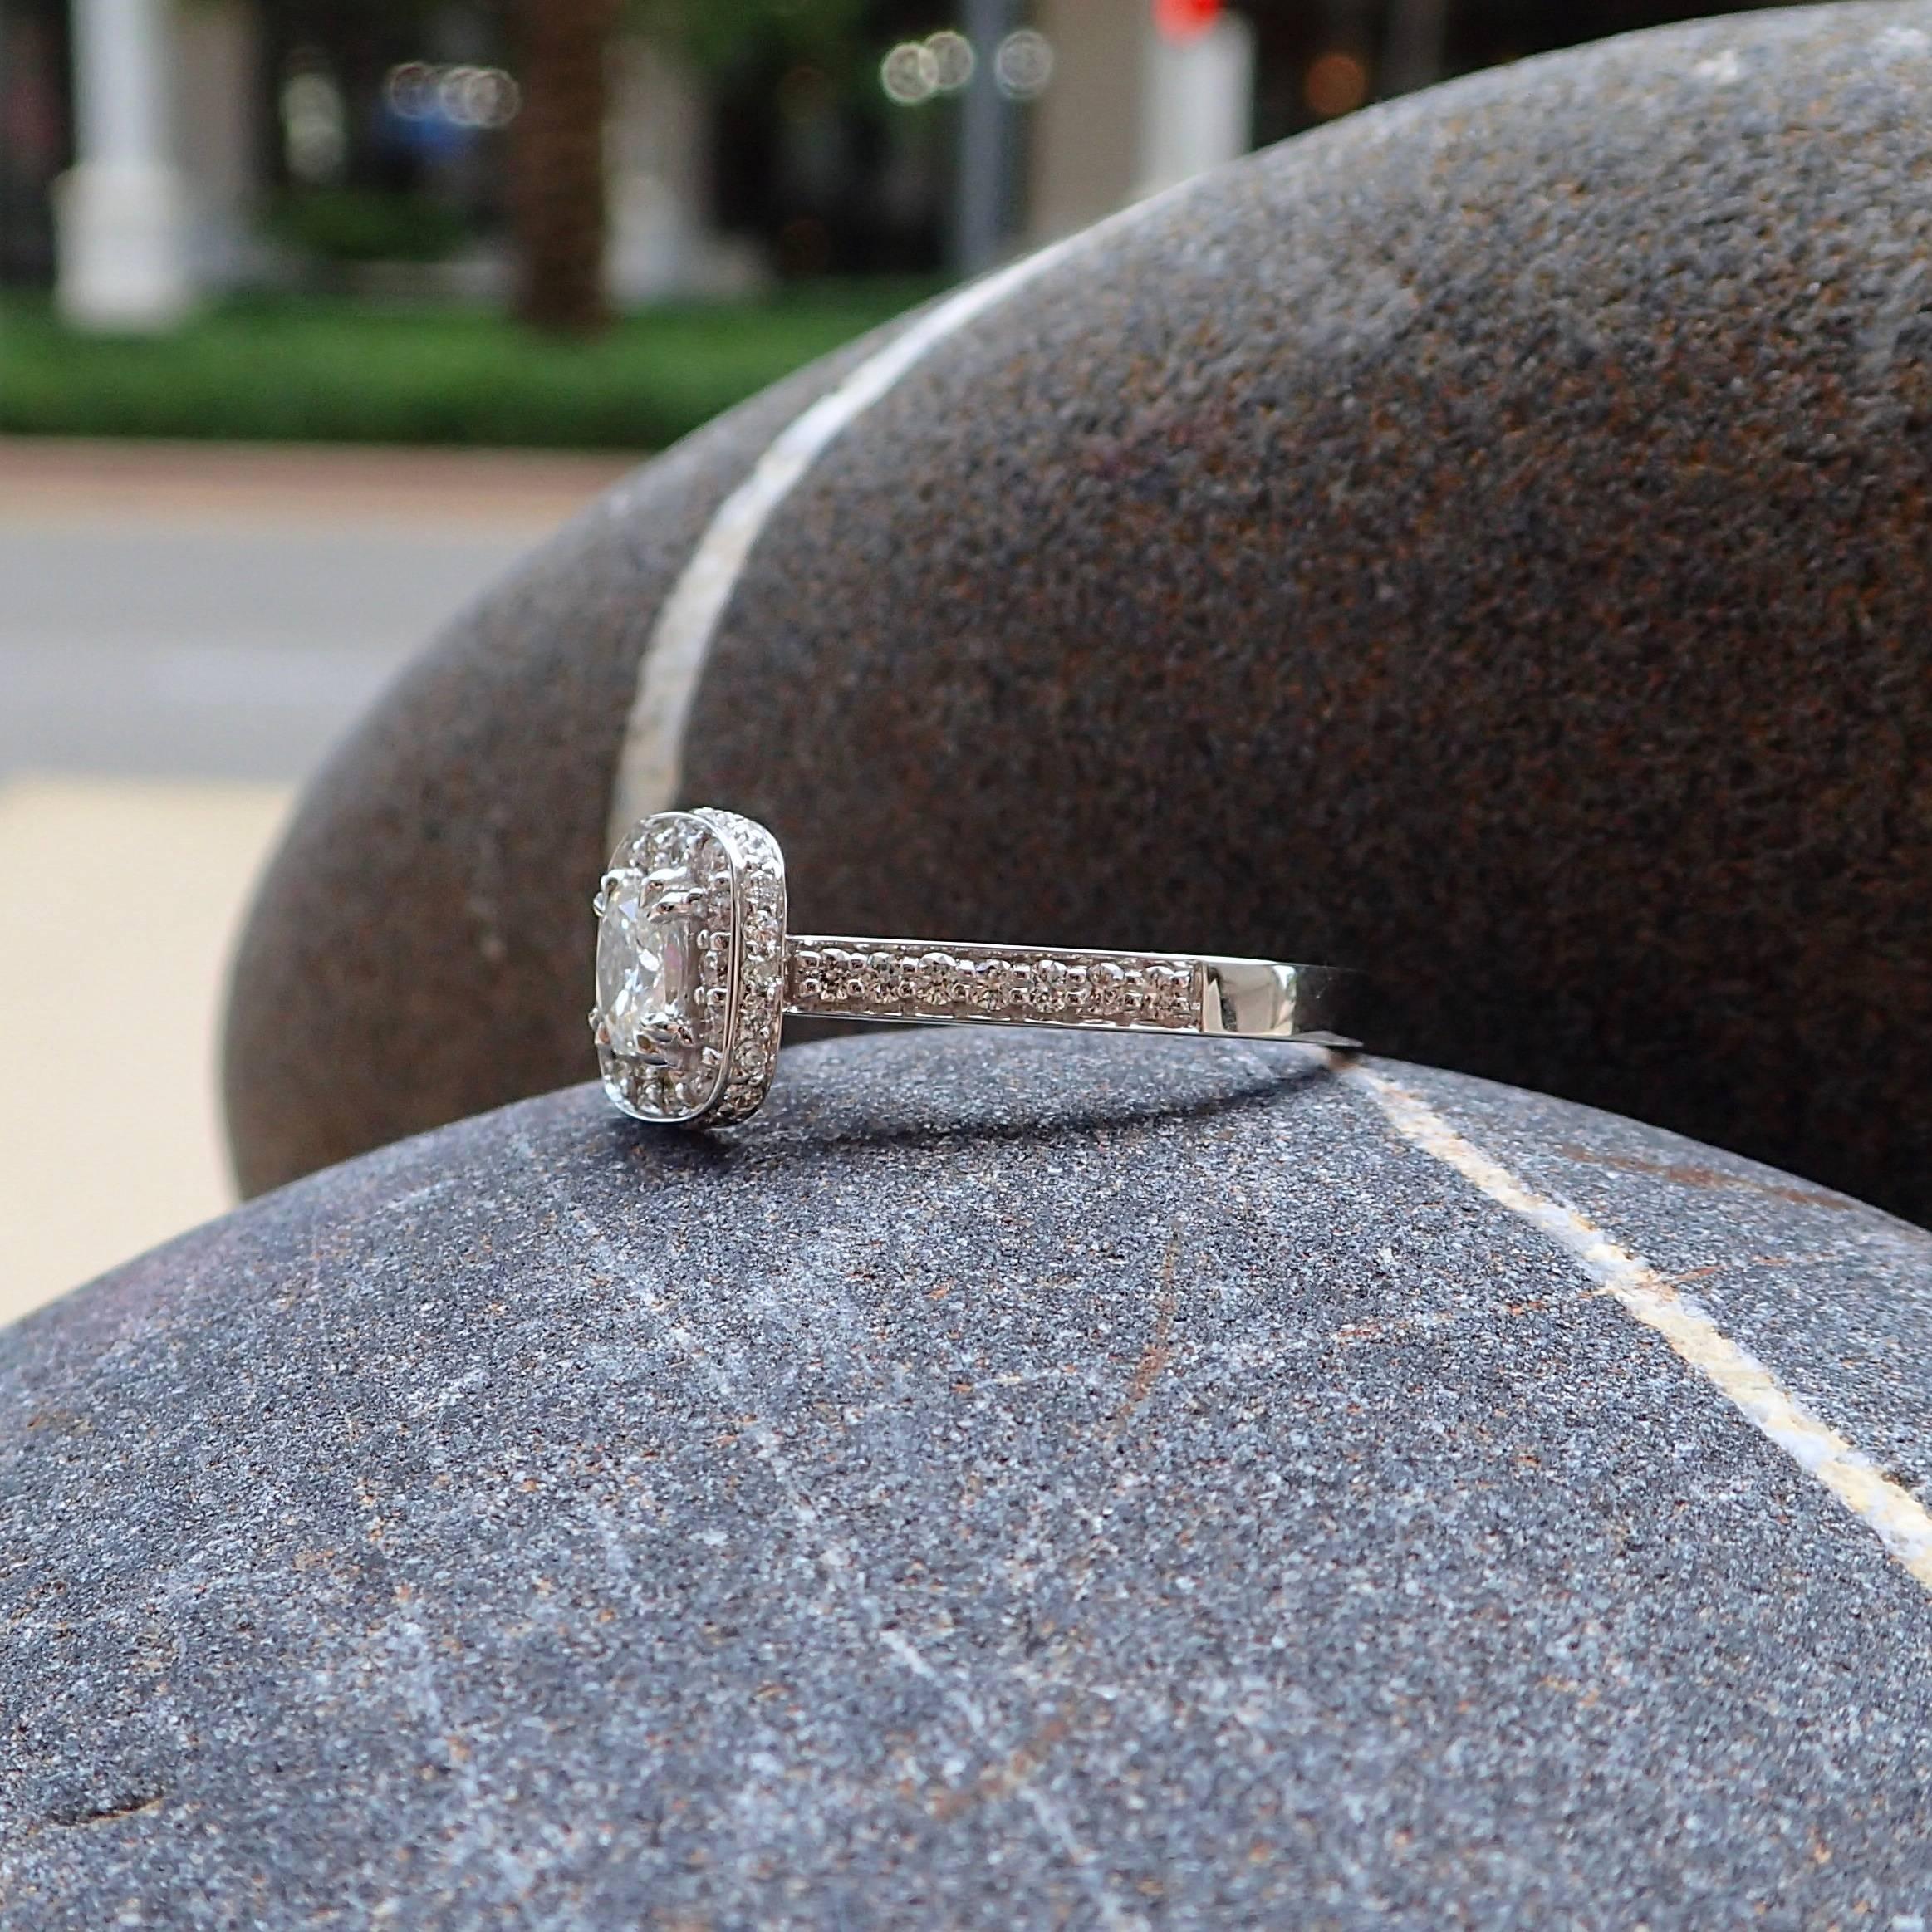 0.81 Carats of Diamond - 18k White Gold Radiant Cut Engagement Ring with Halo In New Condition For Sale In Coral Gables, FL